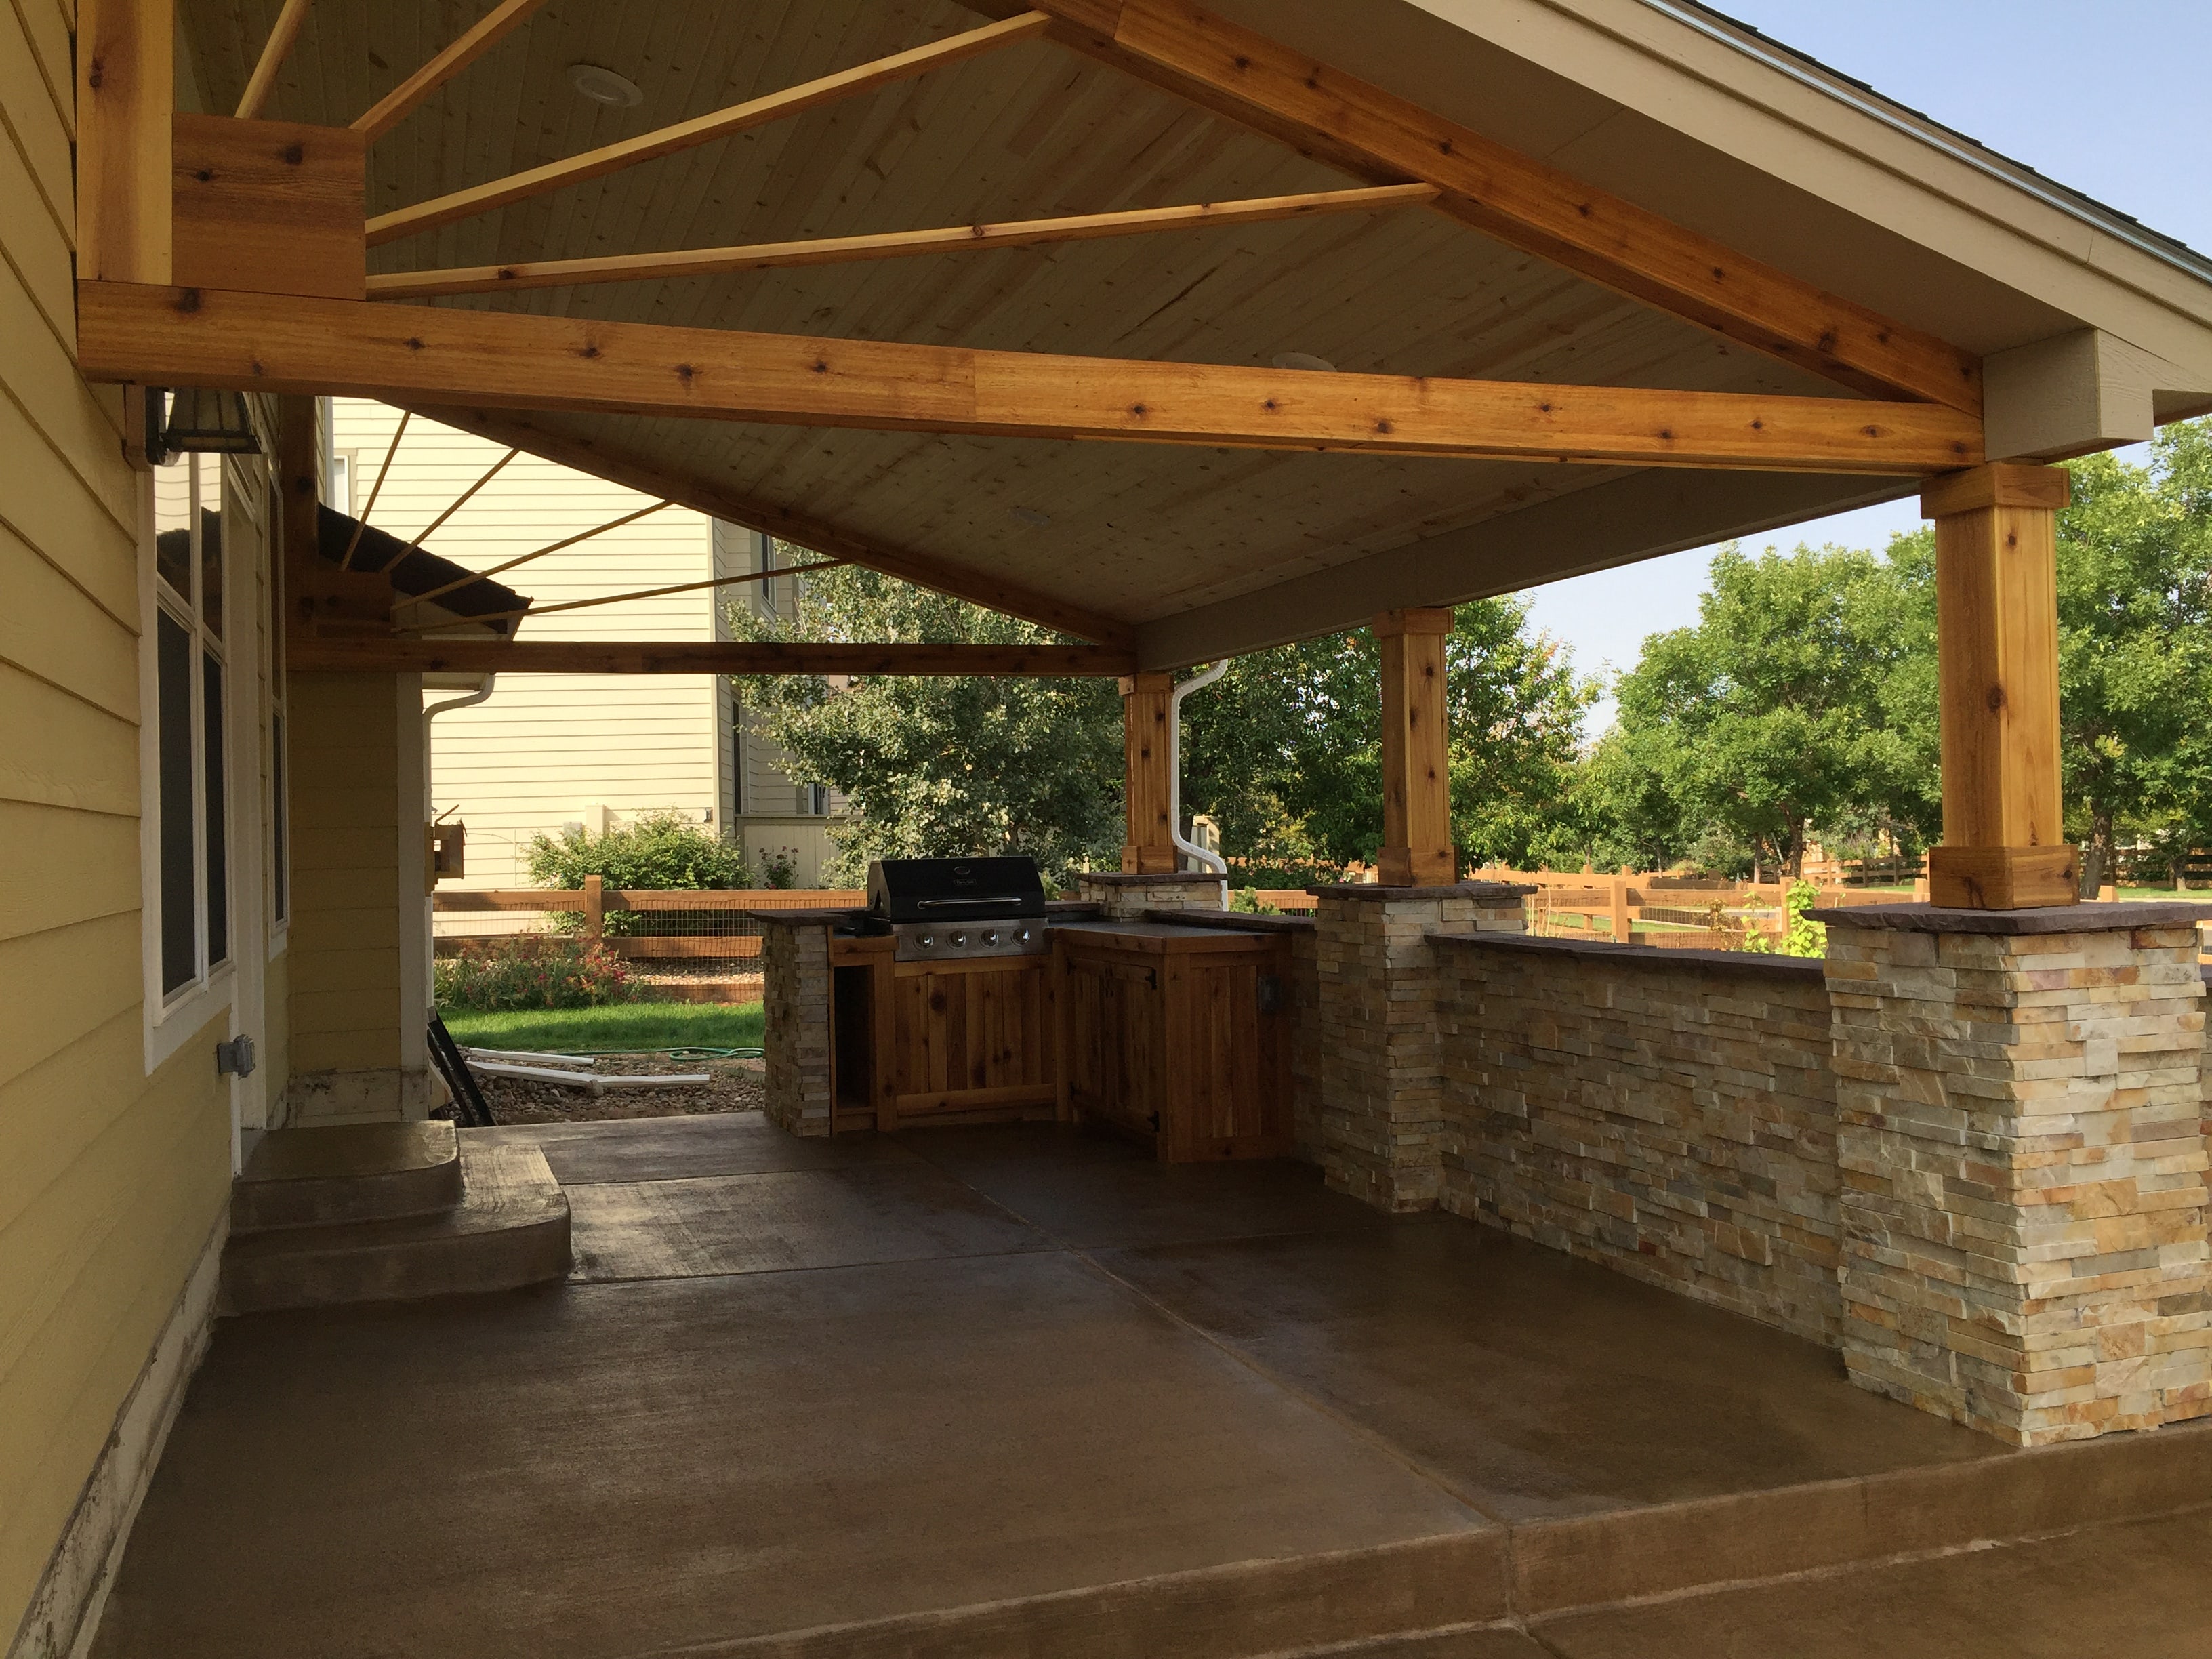 Norstone Aztec XLX Stacked Stone veneer panels used on a large outdoor kitchen with roof